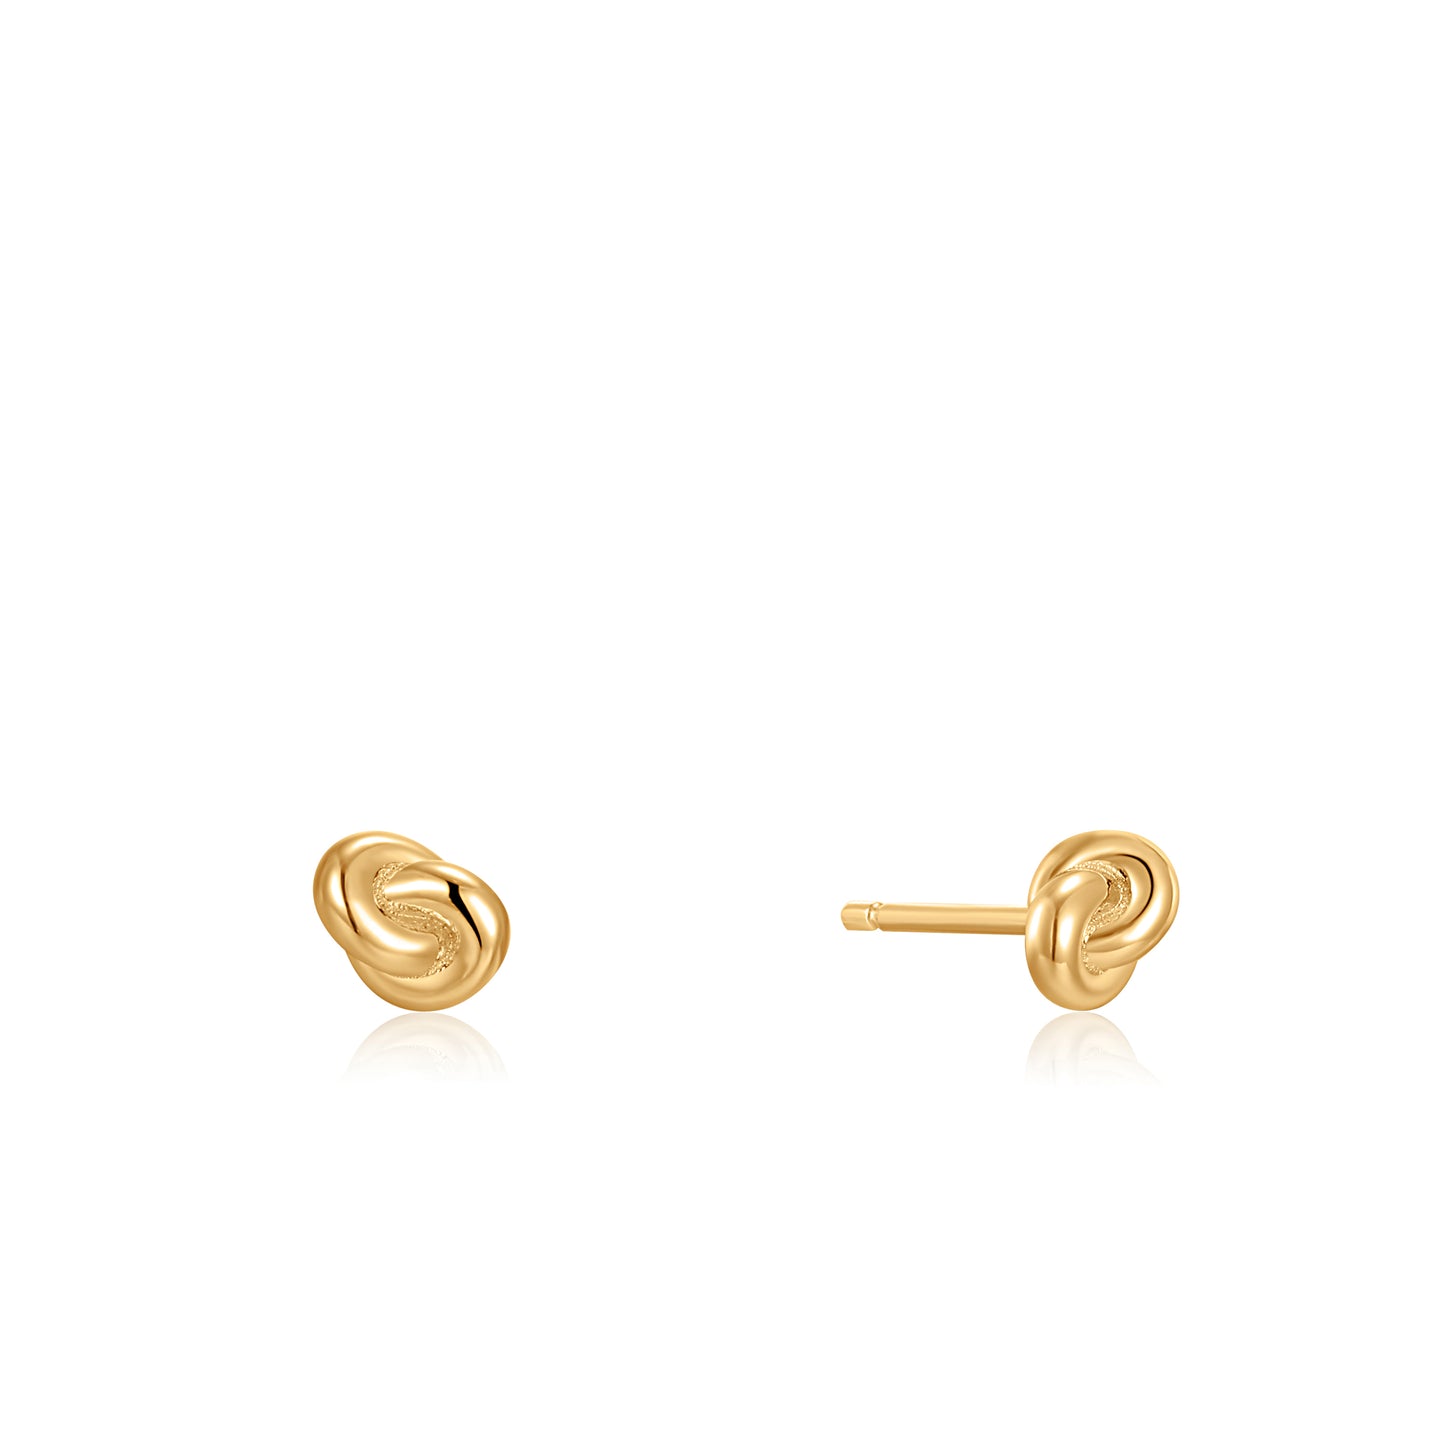 Ania Haie Forget Me Knot Gold Knot Stud Earrings